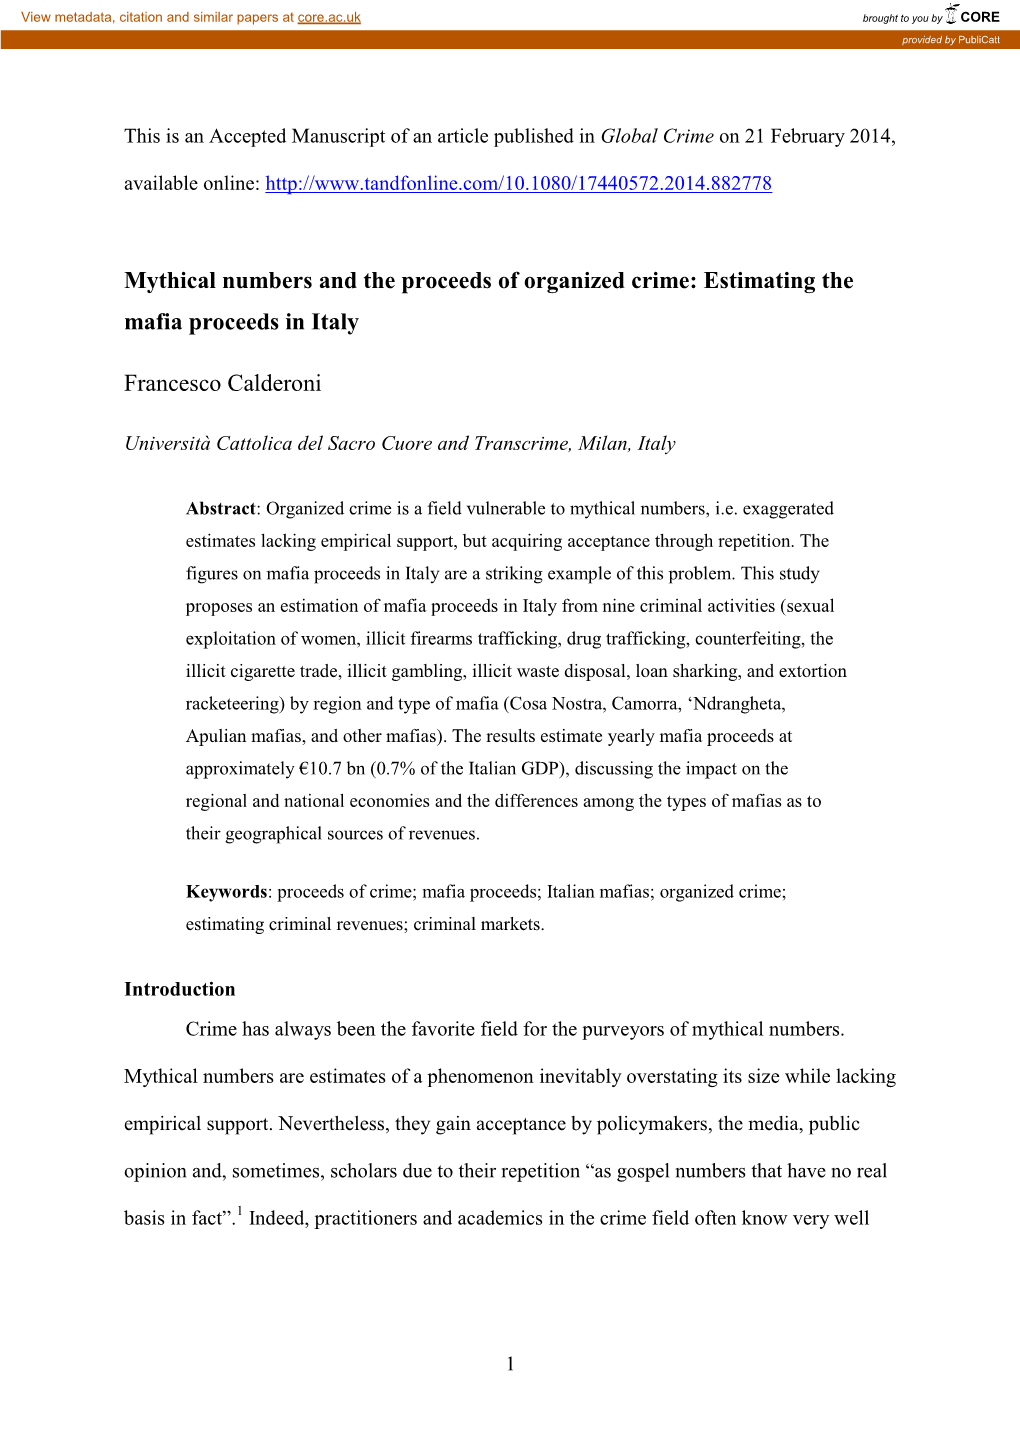 Mythical Numbers and the Proceeds of Organized Crime: Estimating the Mafia Proceeds in Italy